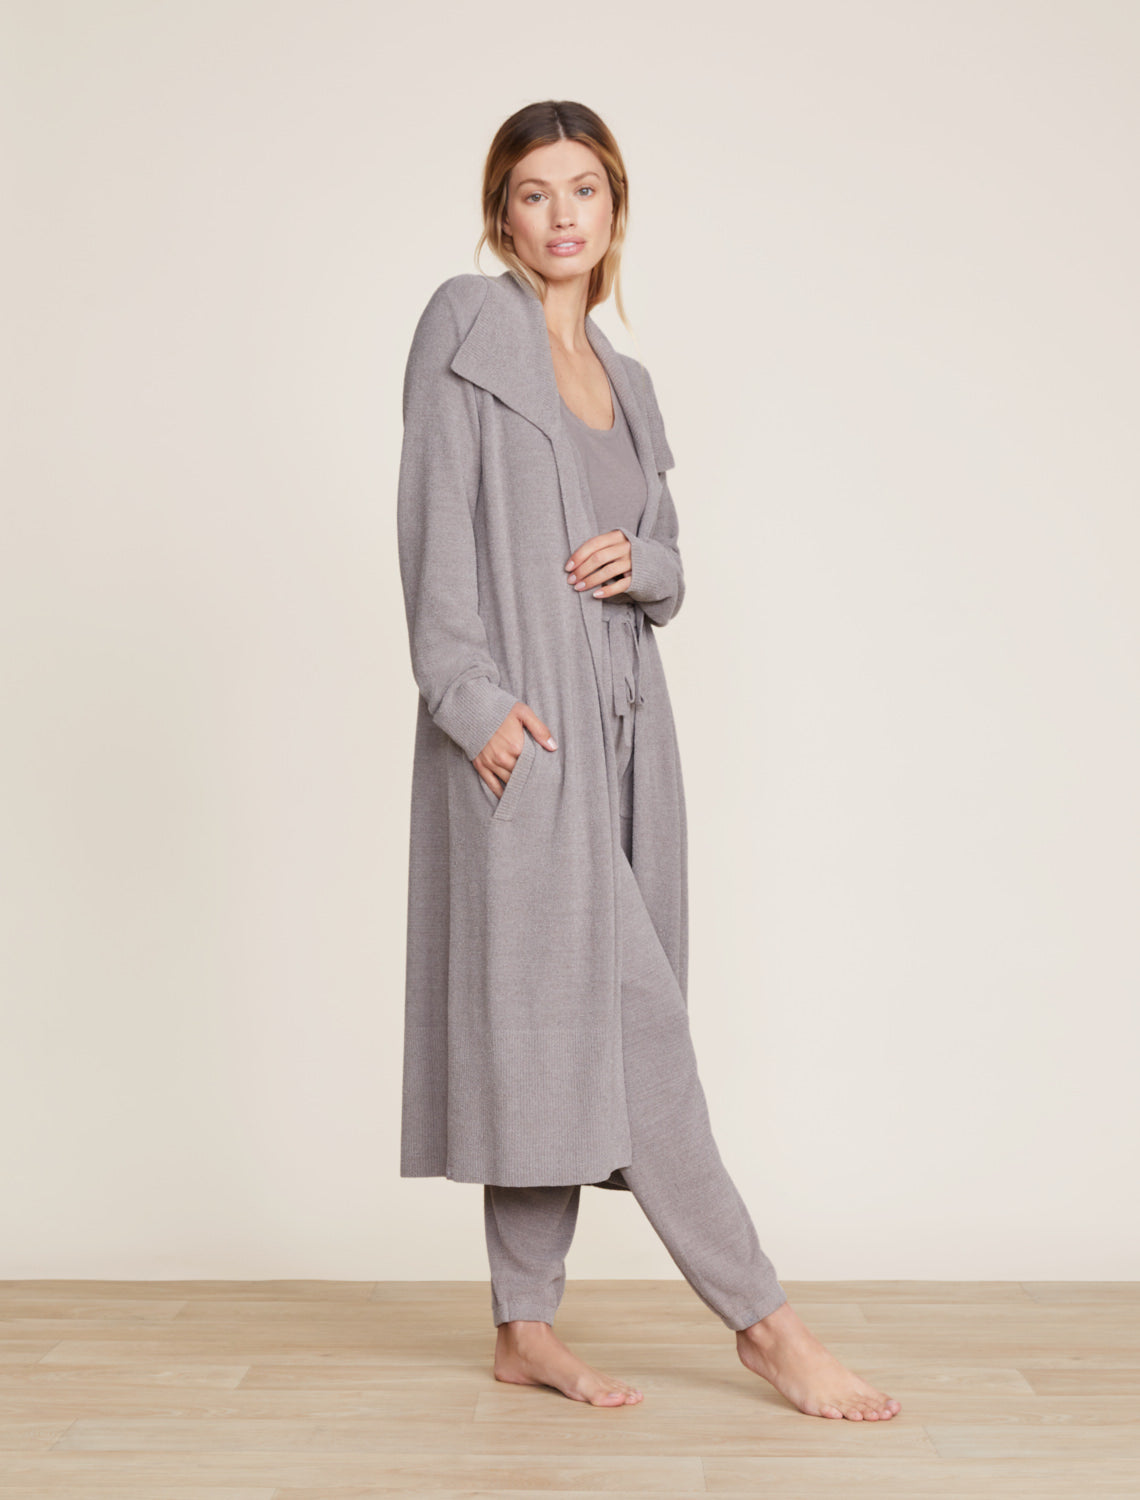 Barefoot Dreams CozyChic Ultra Lite® Wide Collar Long Cardigan-Pewter